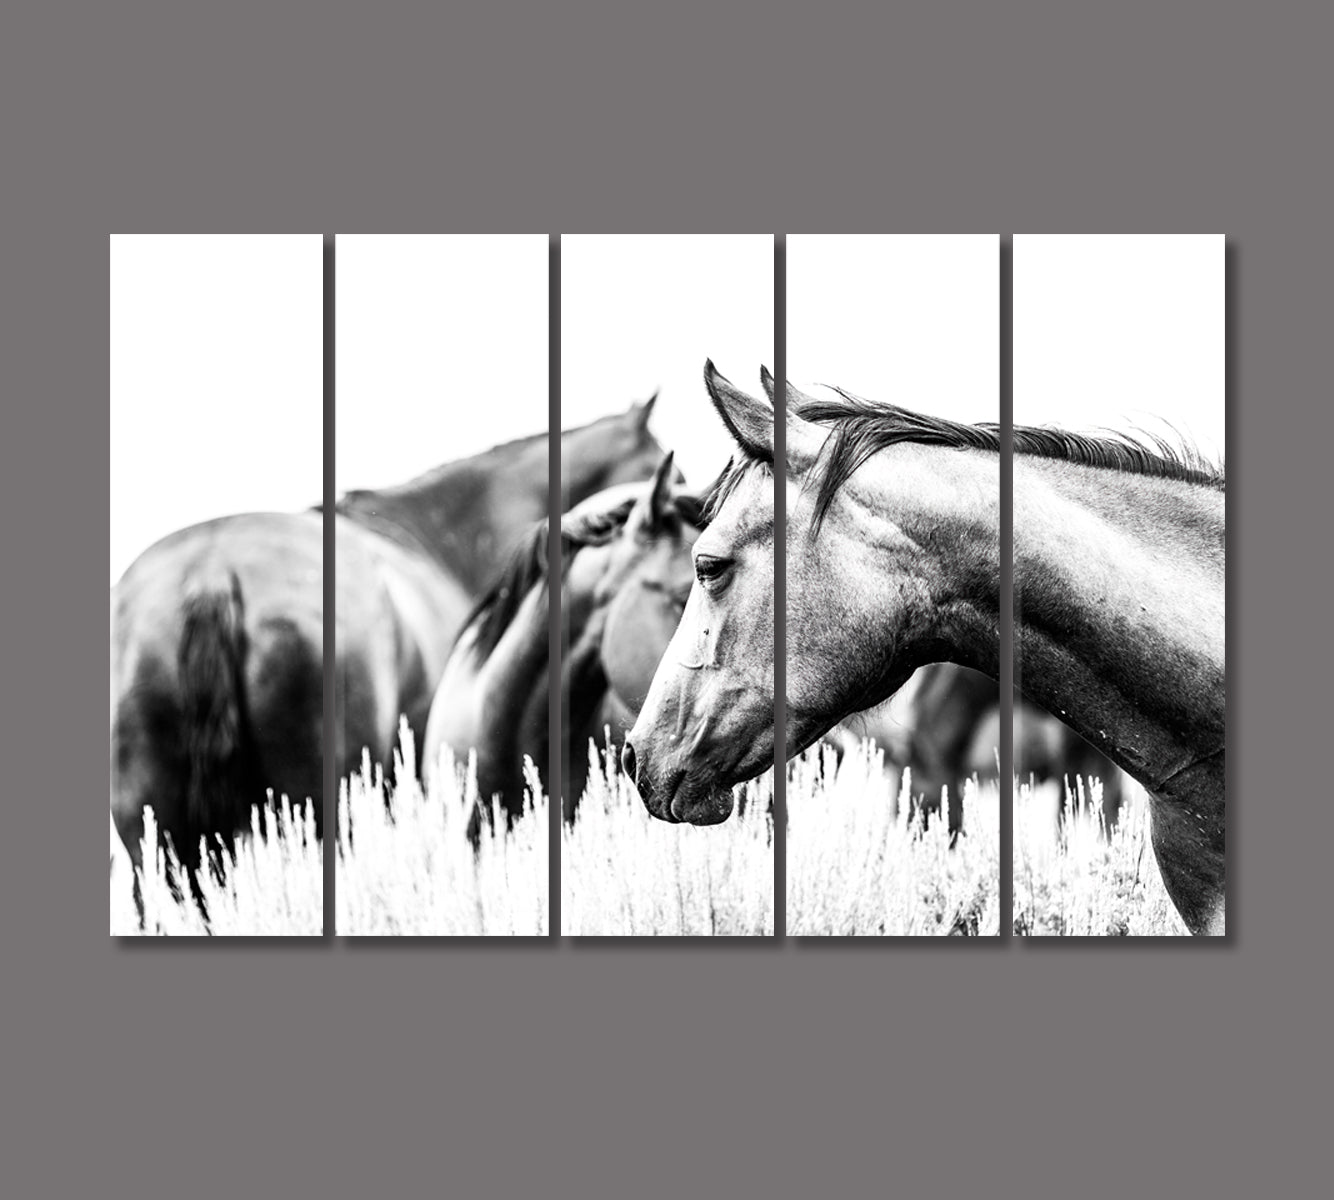 Herd of Horses in Black and White Canvas Print-Canvas Print-CetArt-5 Panels-36x24 inches-CetArt